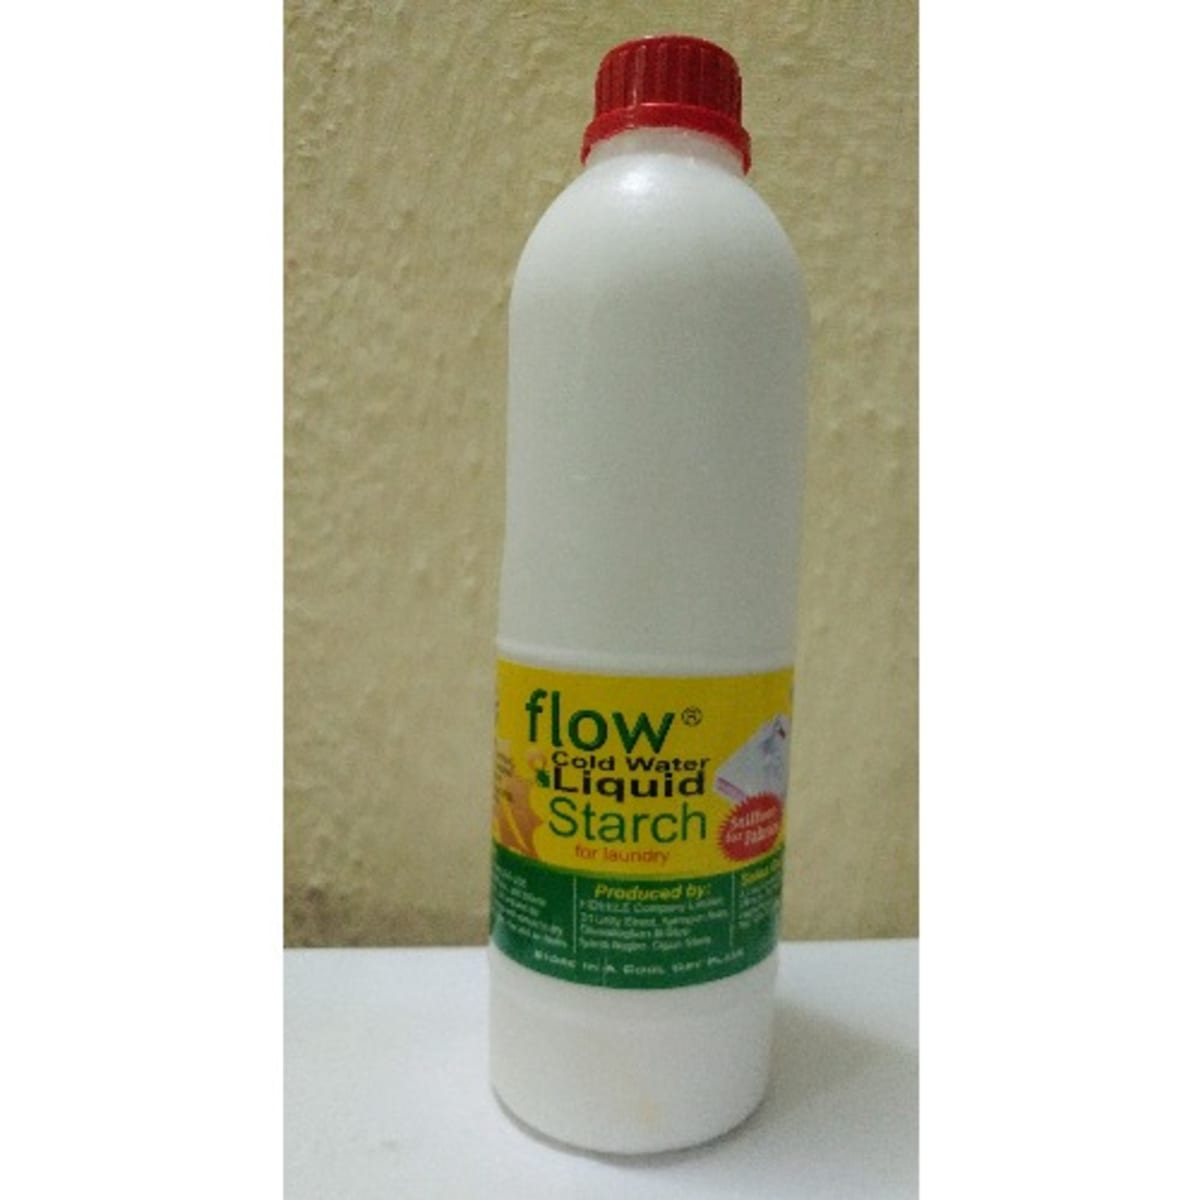 FLOW COLD WATER LIQUID STARCH 1LITRE - MINARETS PHARMACY AND